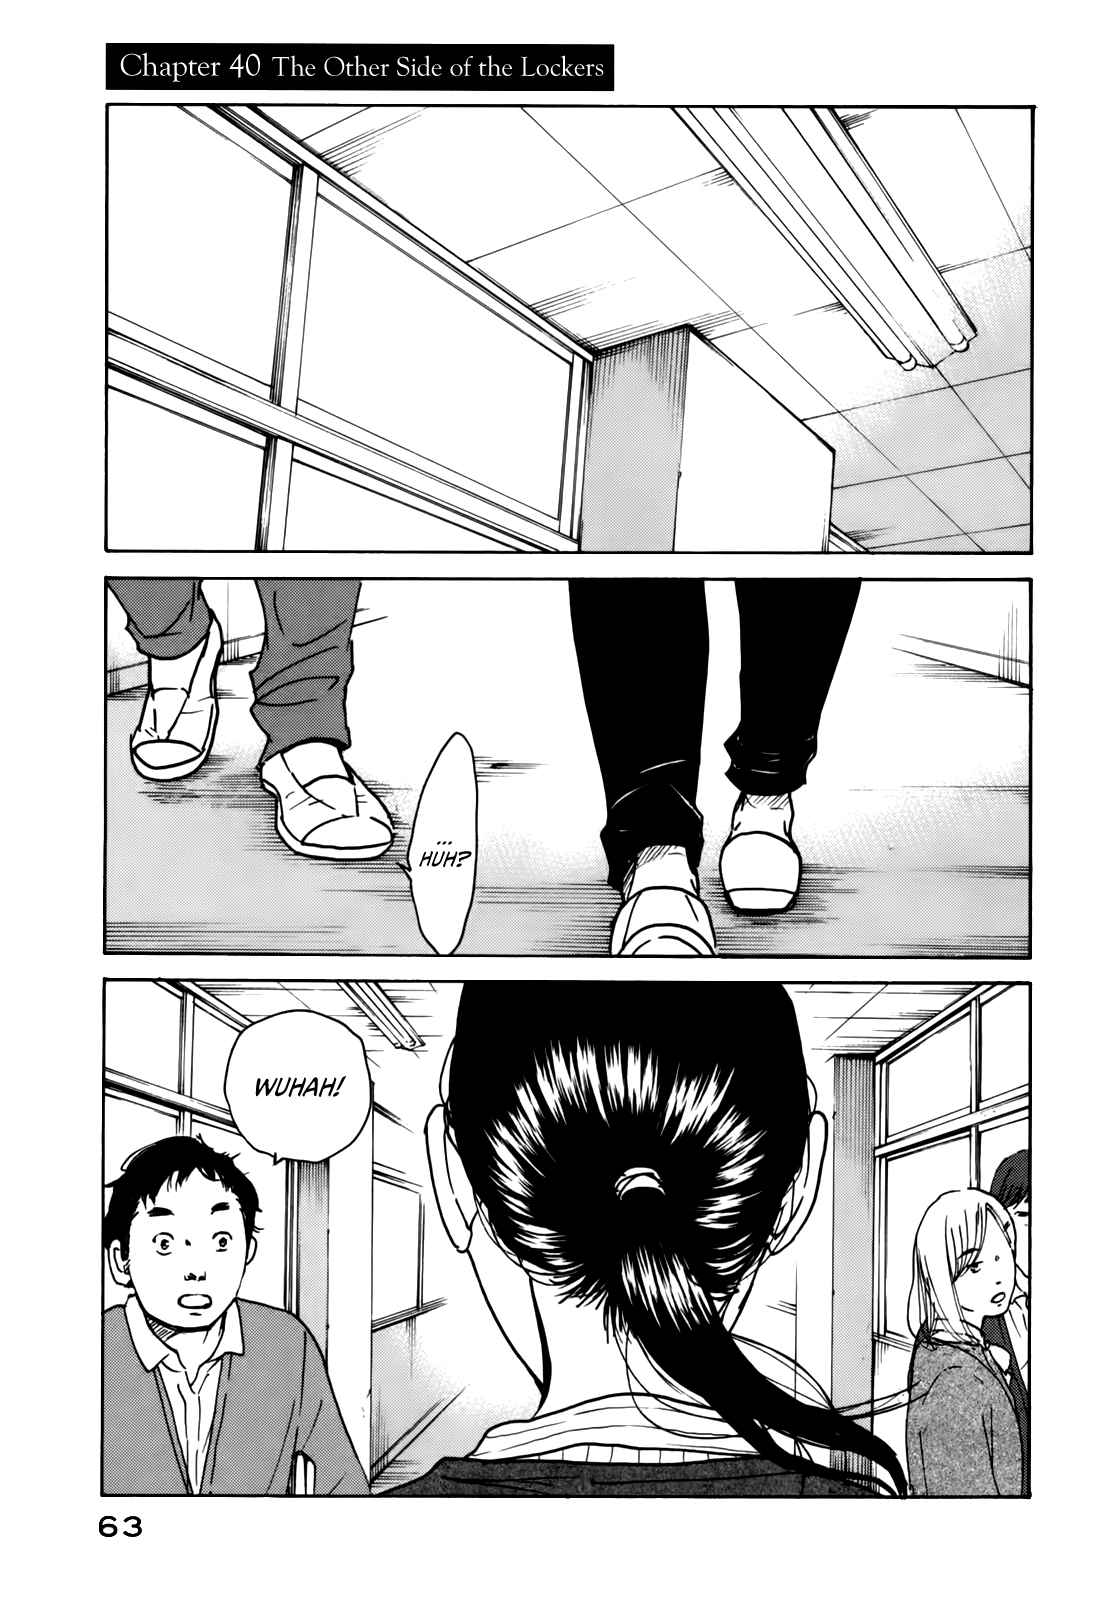 Sensei no Shiroi Uso Vol. 7 Ch. 40 On the Other Side of the Lockers